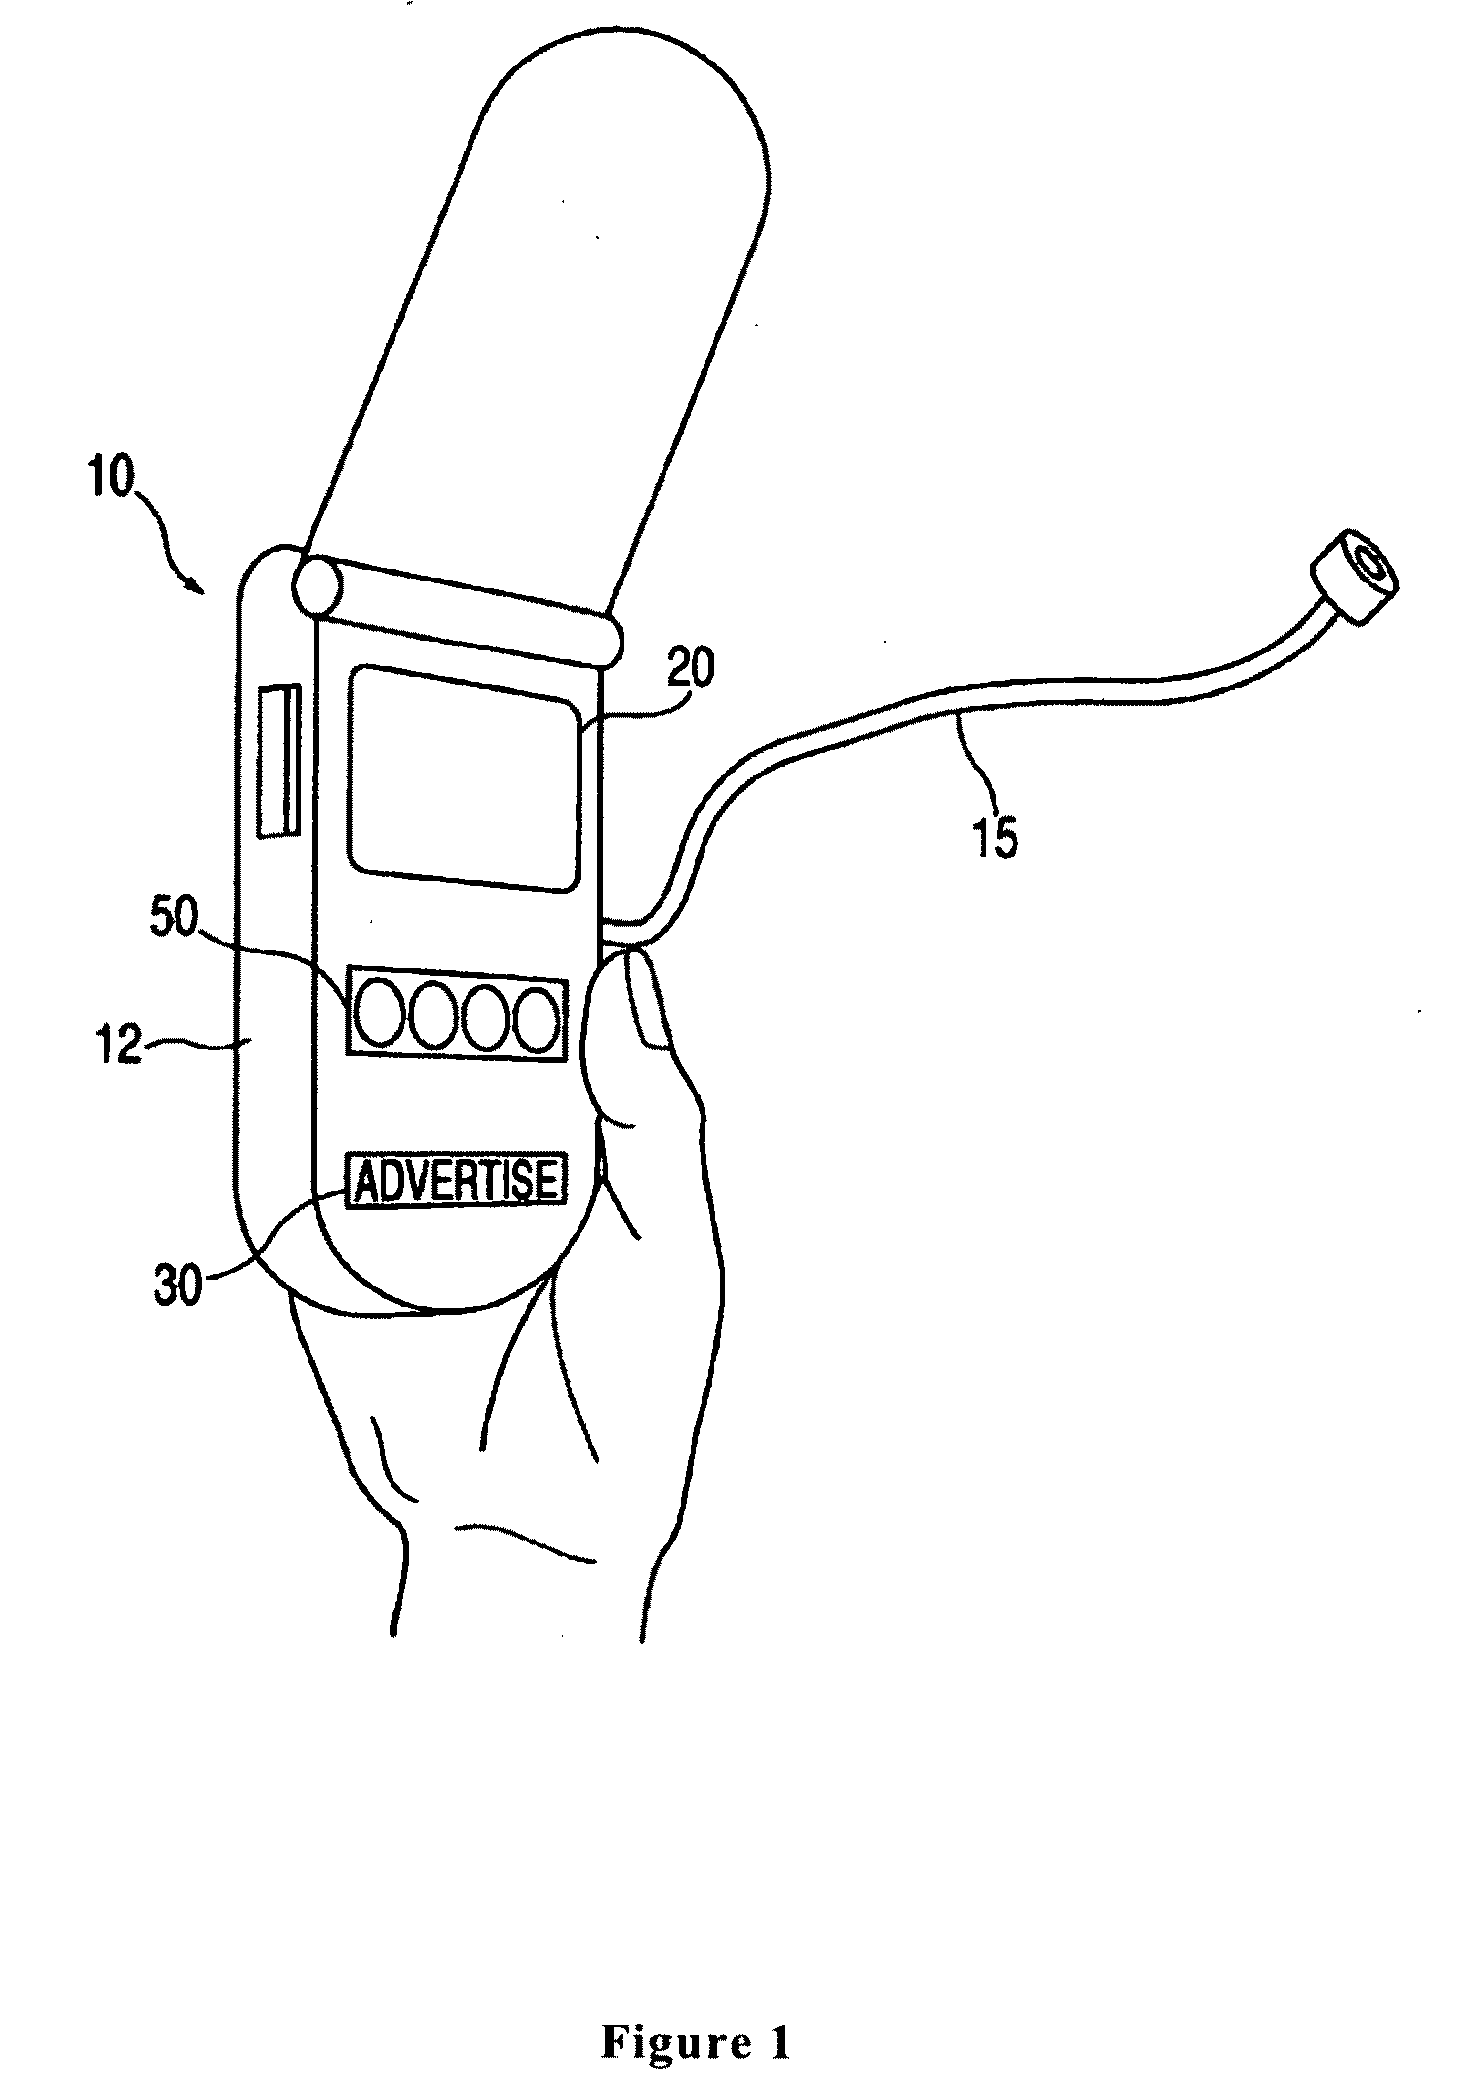 Method, system and apparatus for interactive billboard advertising at a live entertainment event